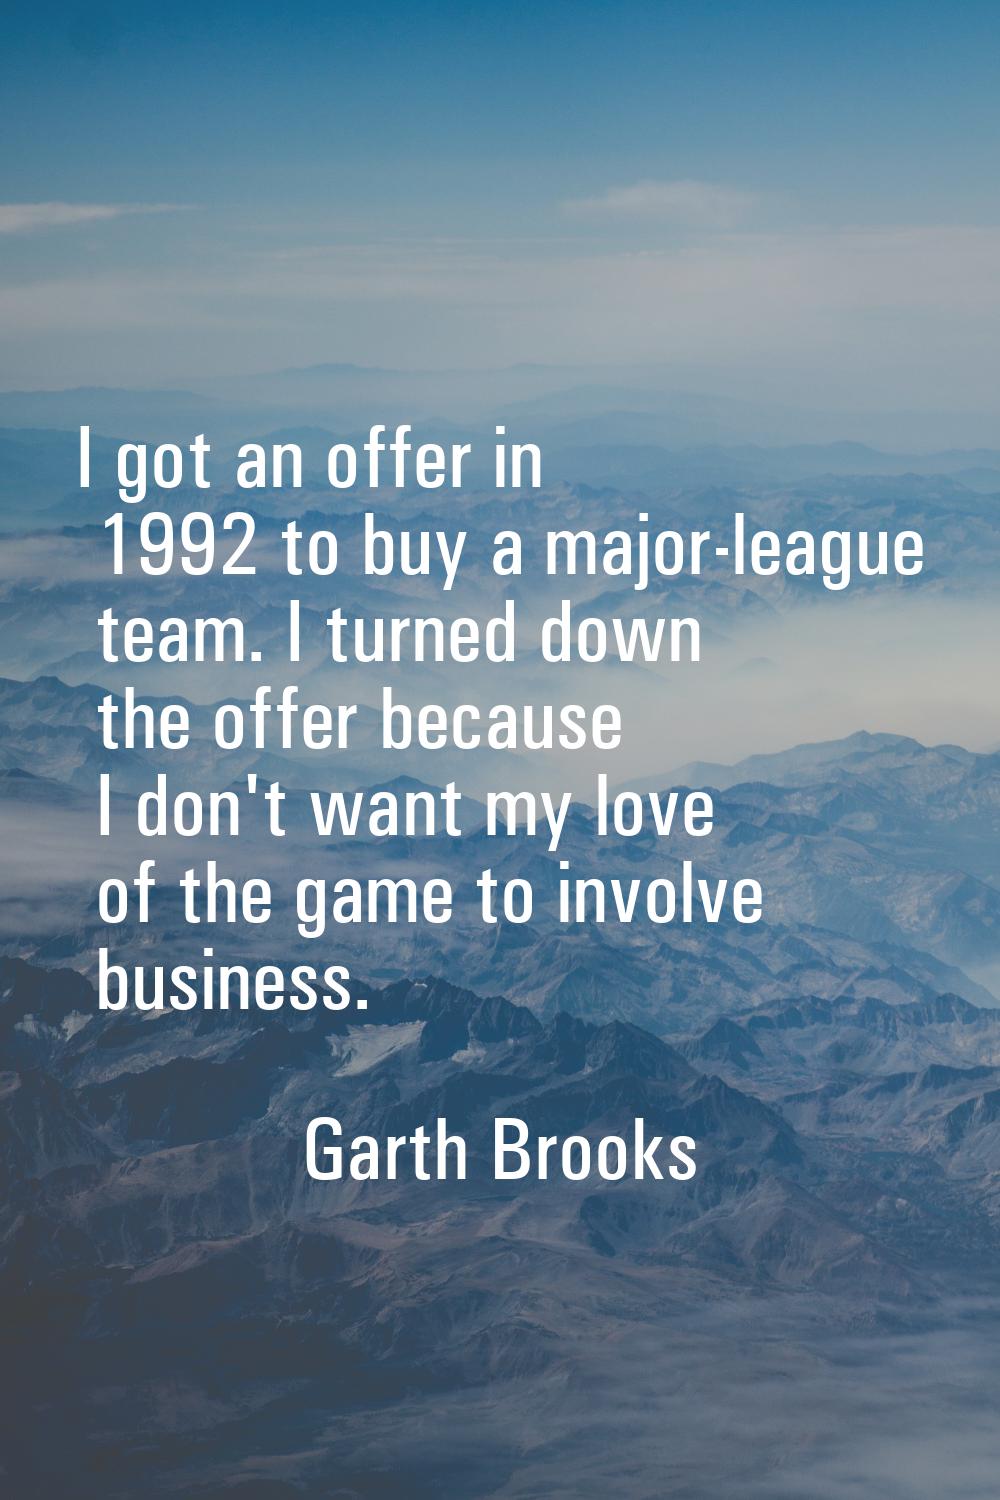 I got an offer in 1992 to buy a major-league team. I turned down the offer because I don't want my 